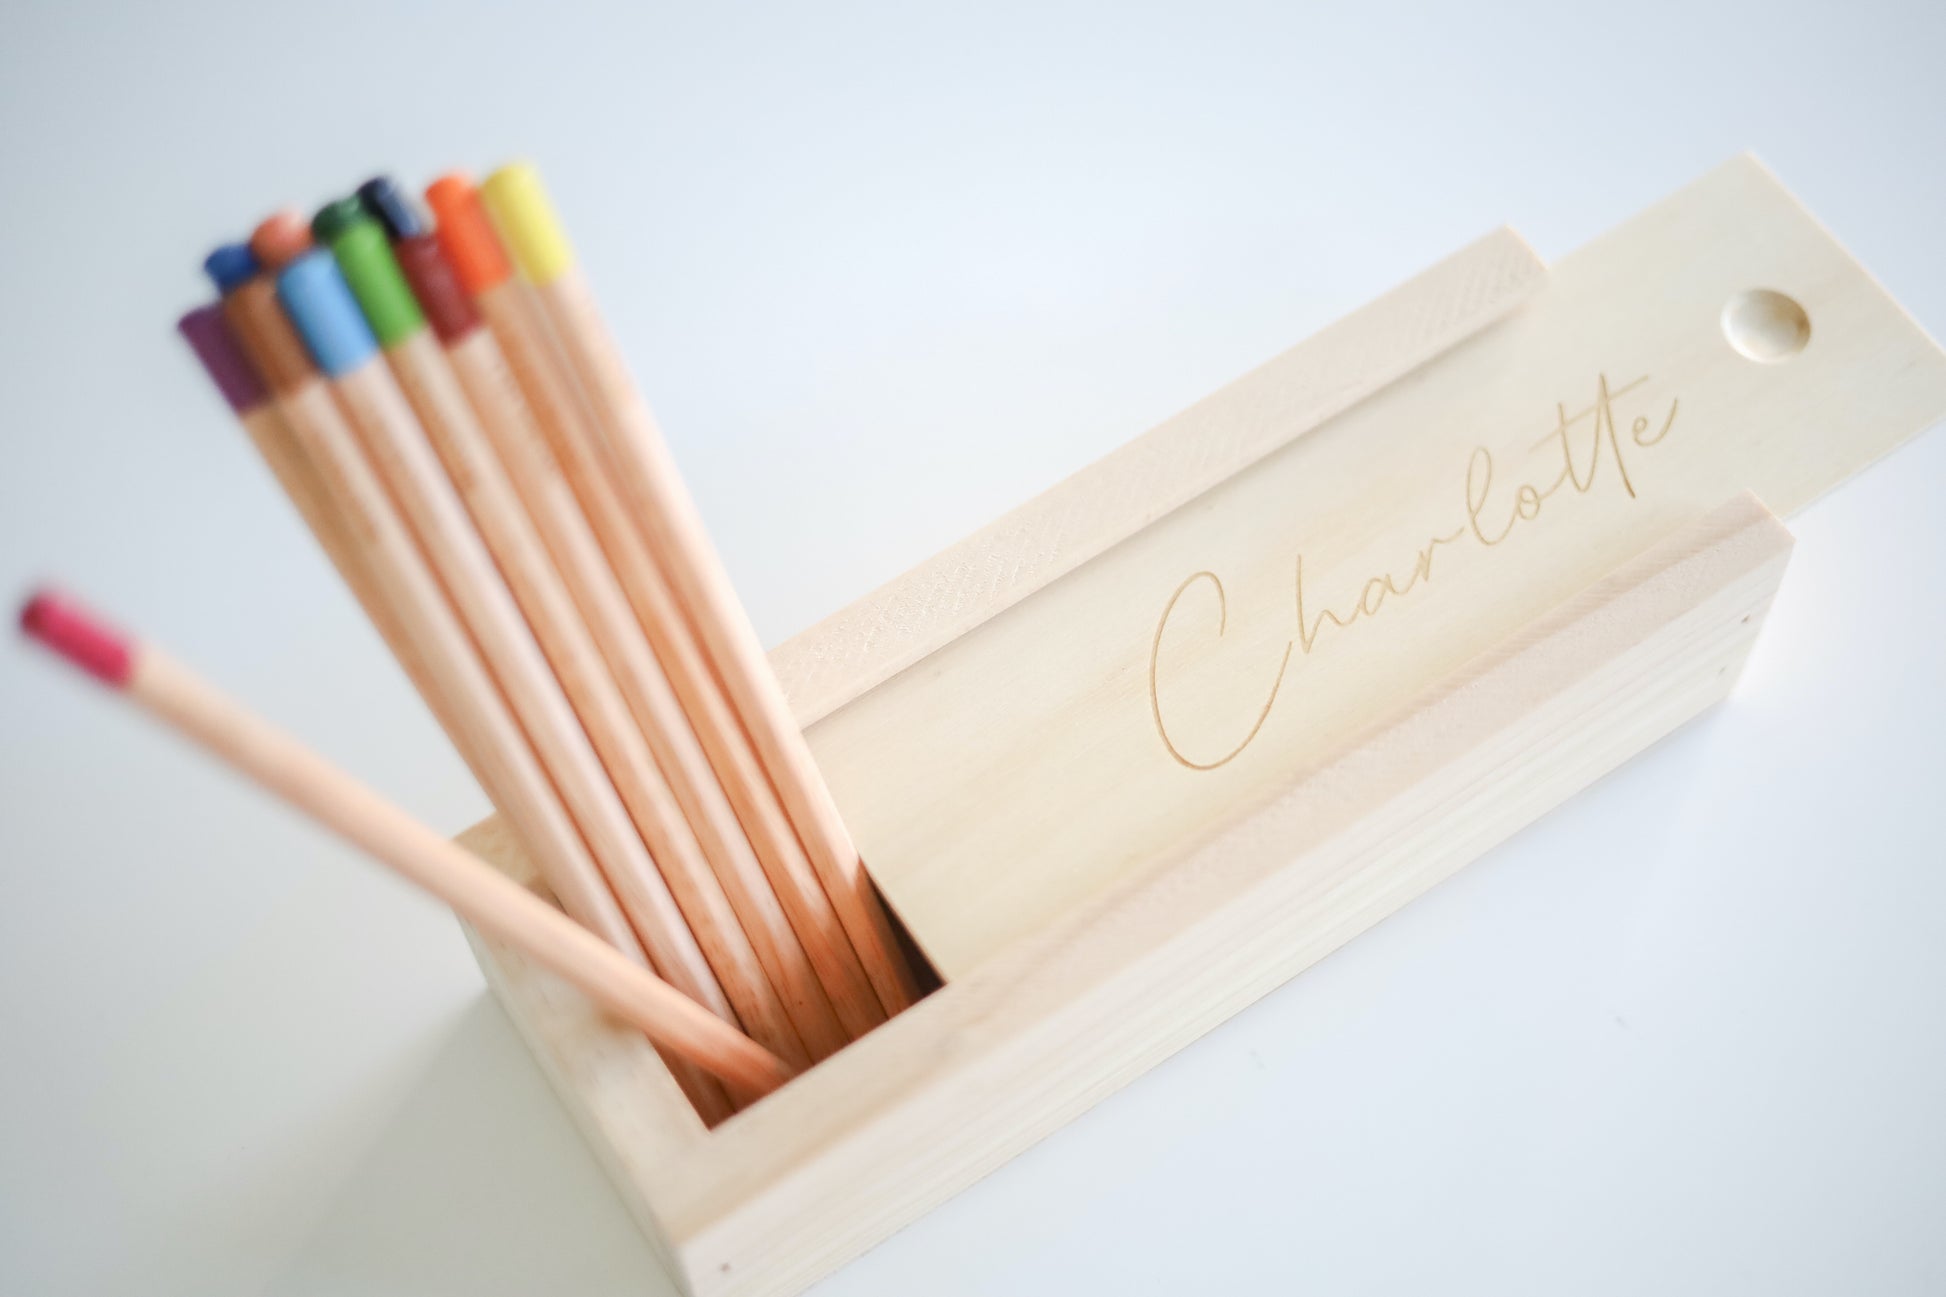 Personalised wooden pencil box and pencils